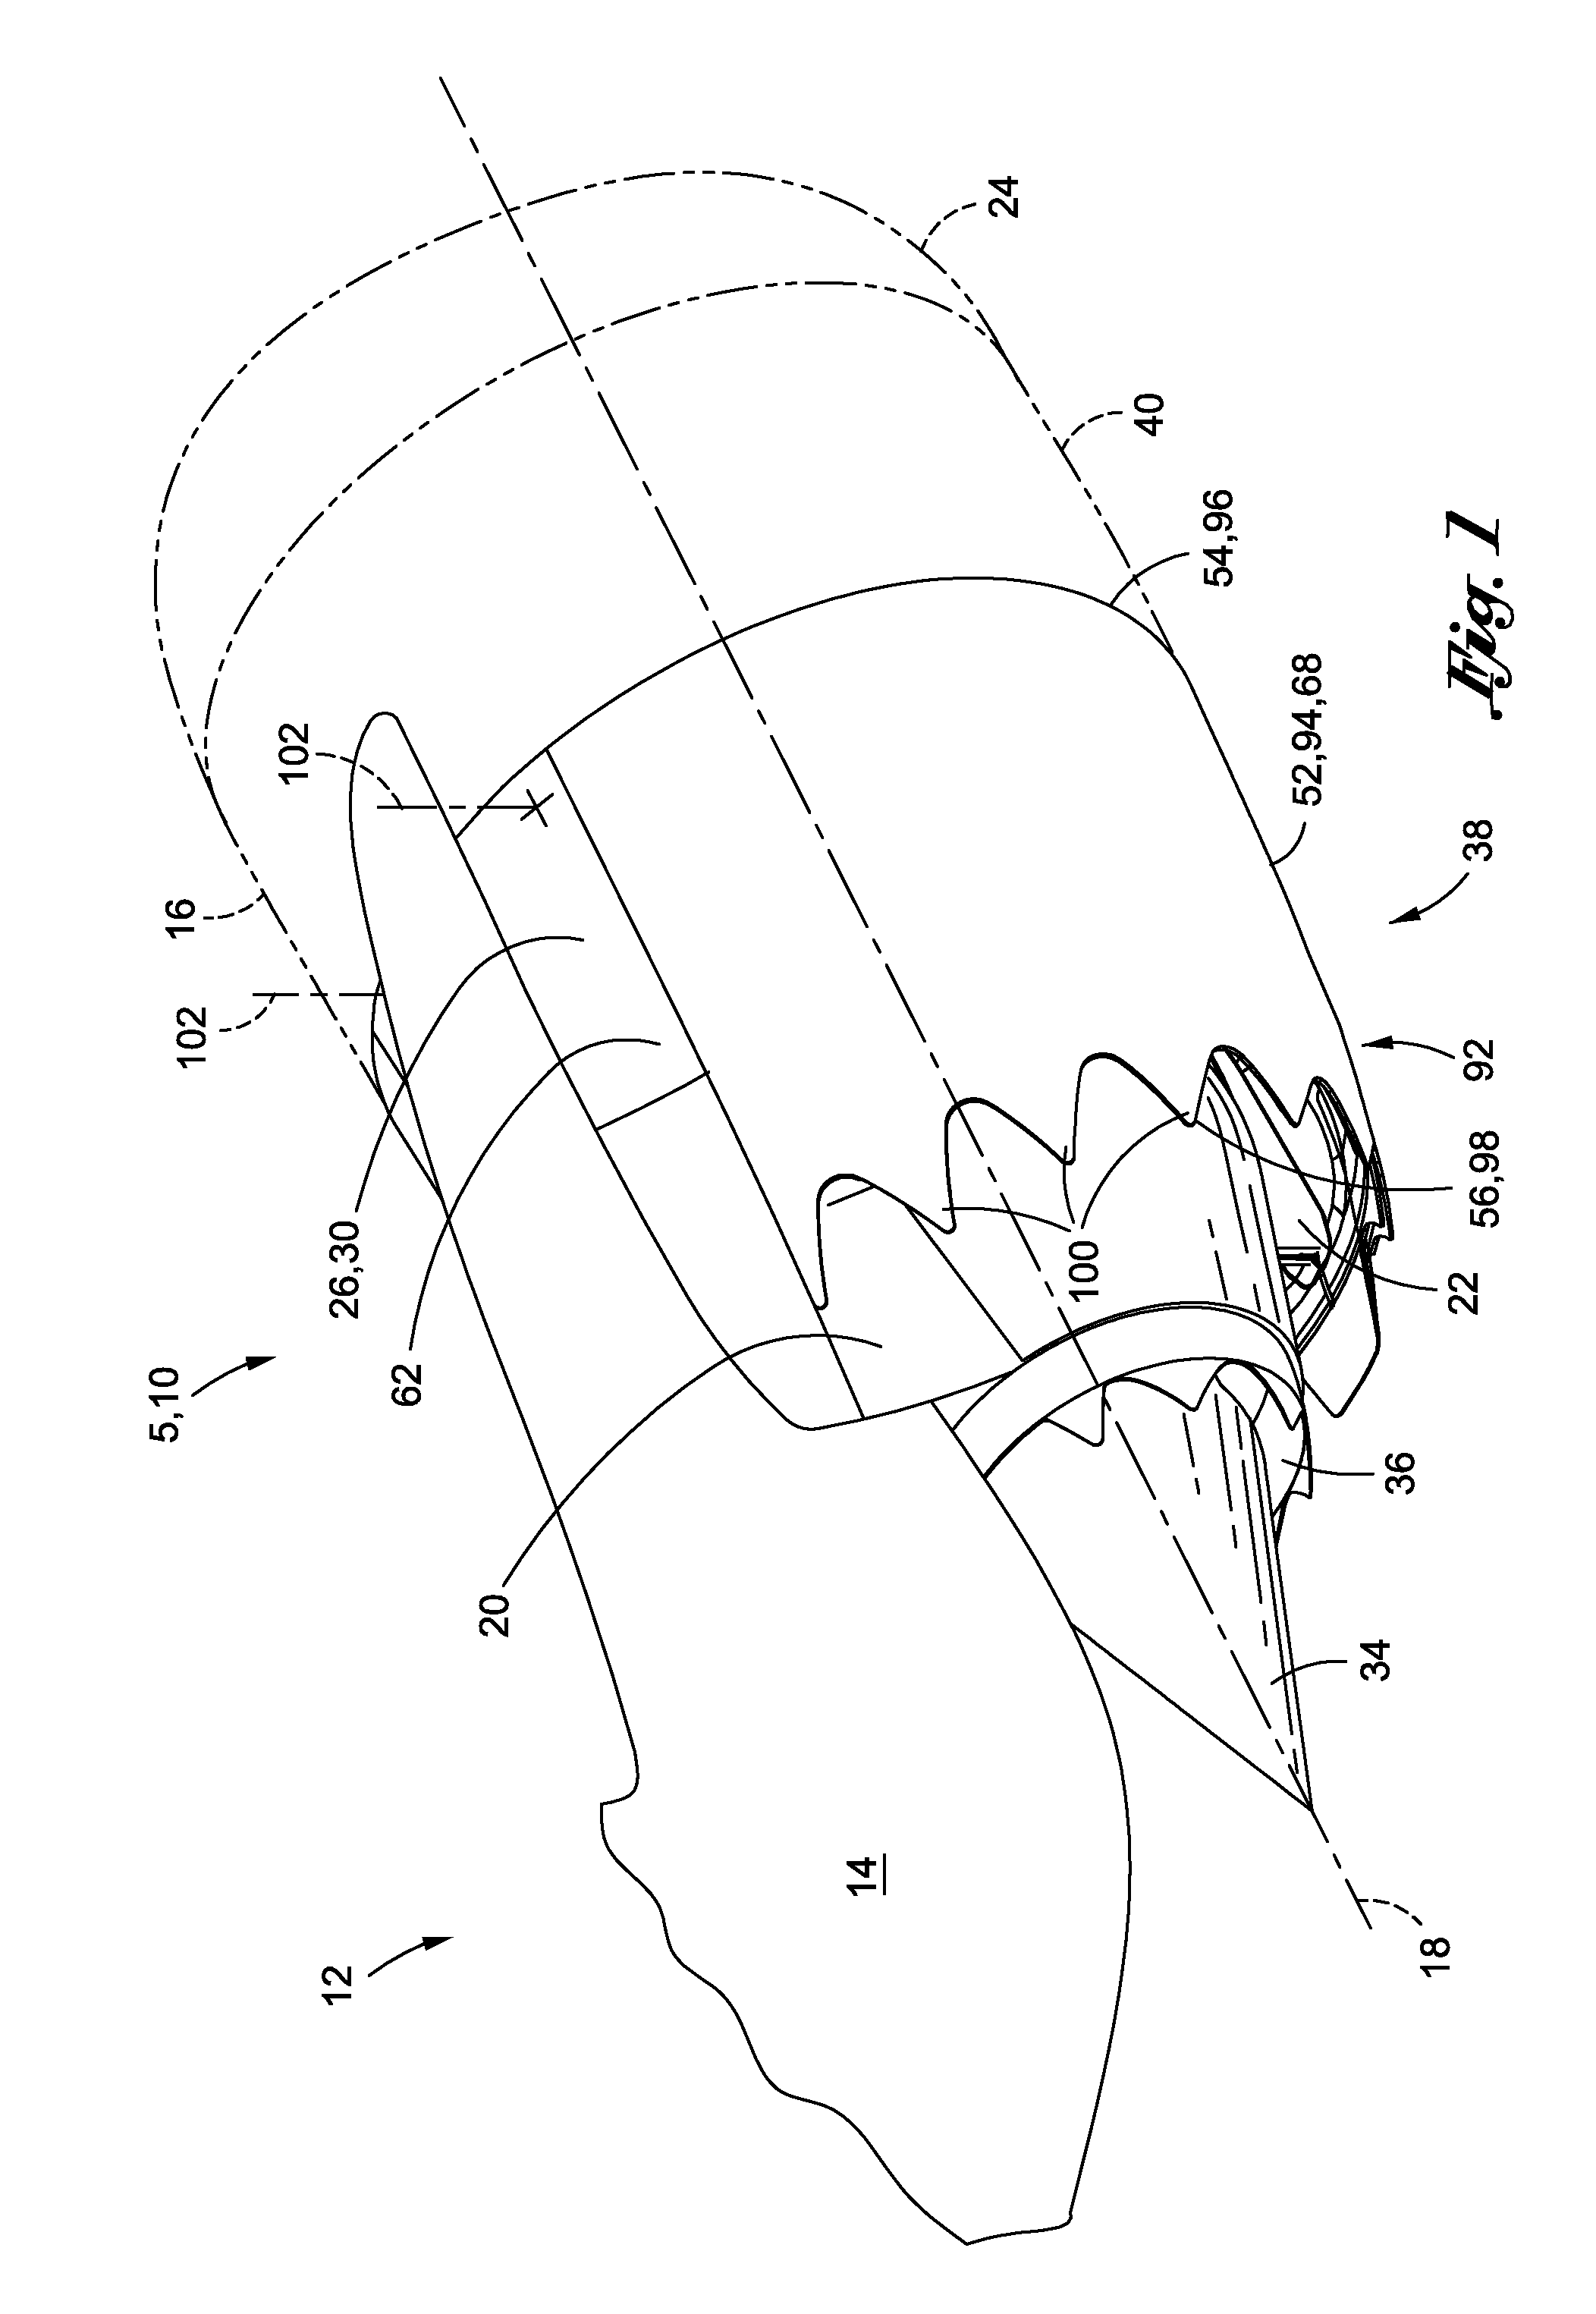 Method of varying a fan duct nozzle throat area of a gas turbine engine